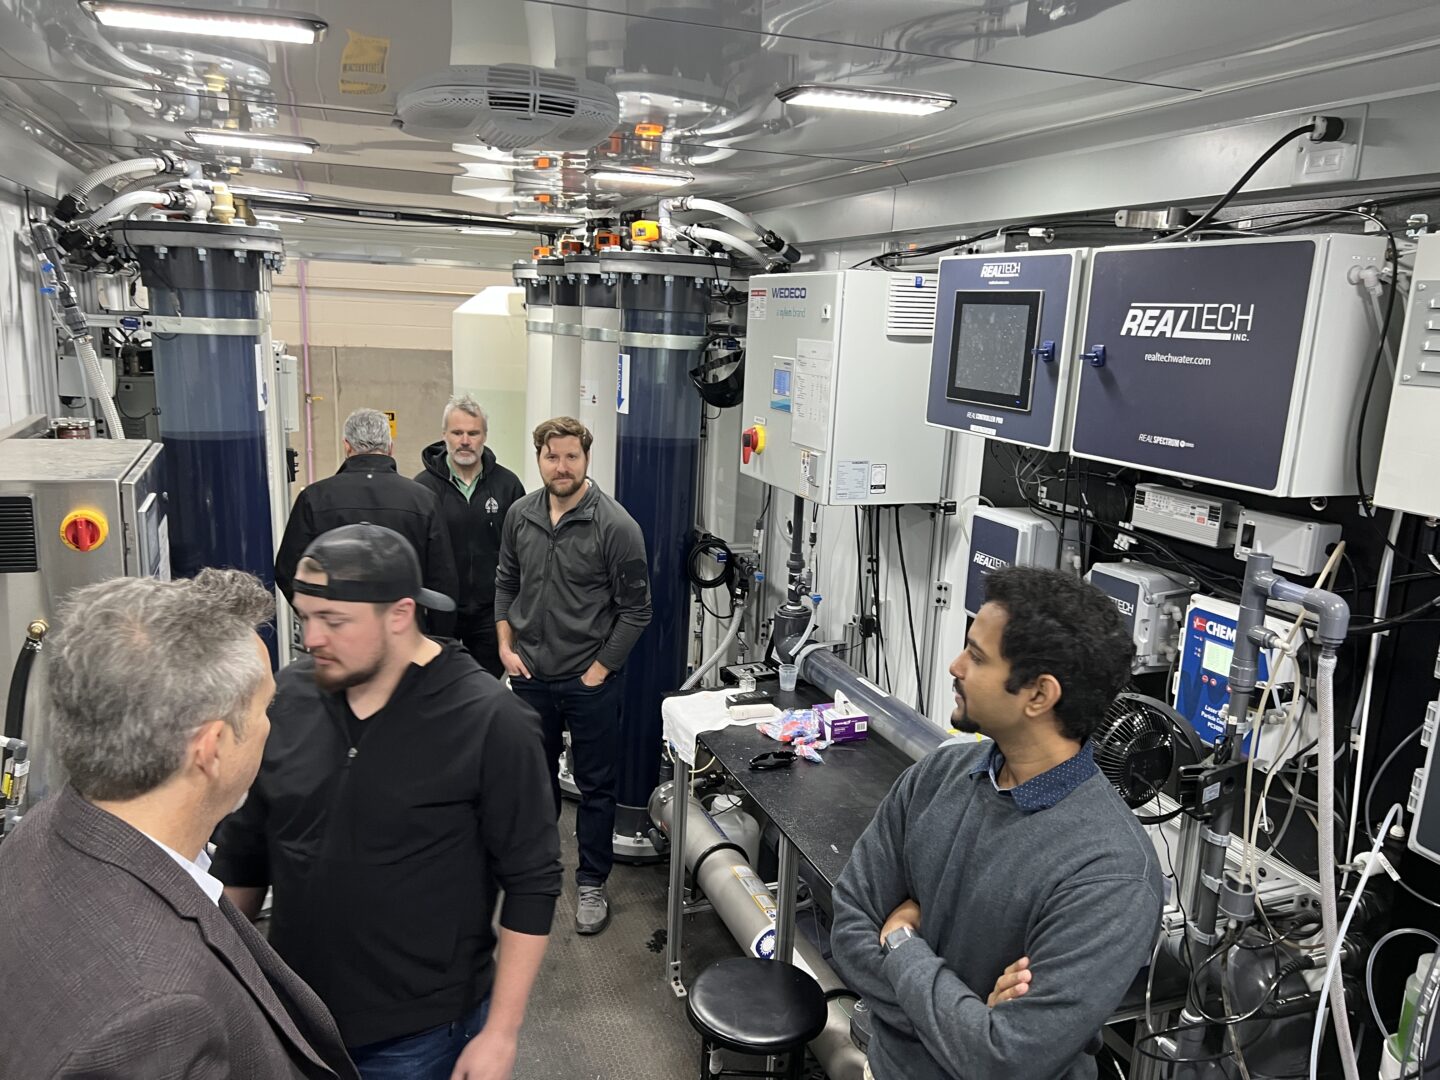 A team from the Colorado School of Mines has developed a Direct Potable Reuse trailer capable of converting wastewater into safe, affordable drinking water. (Credit: Peter Fiske)